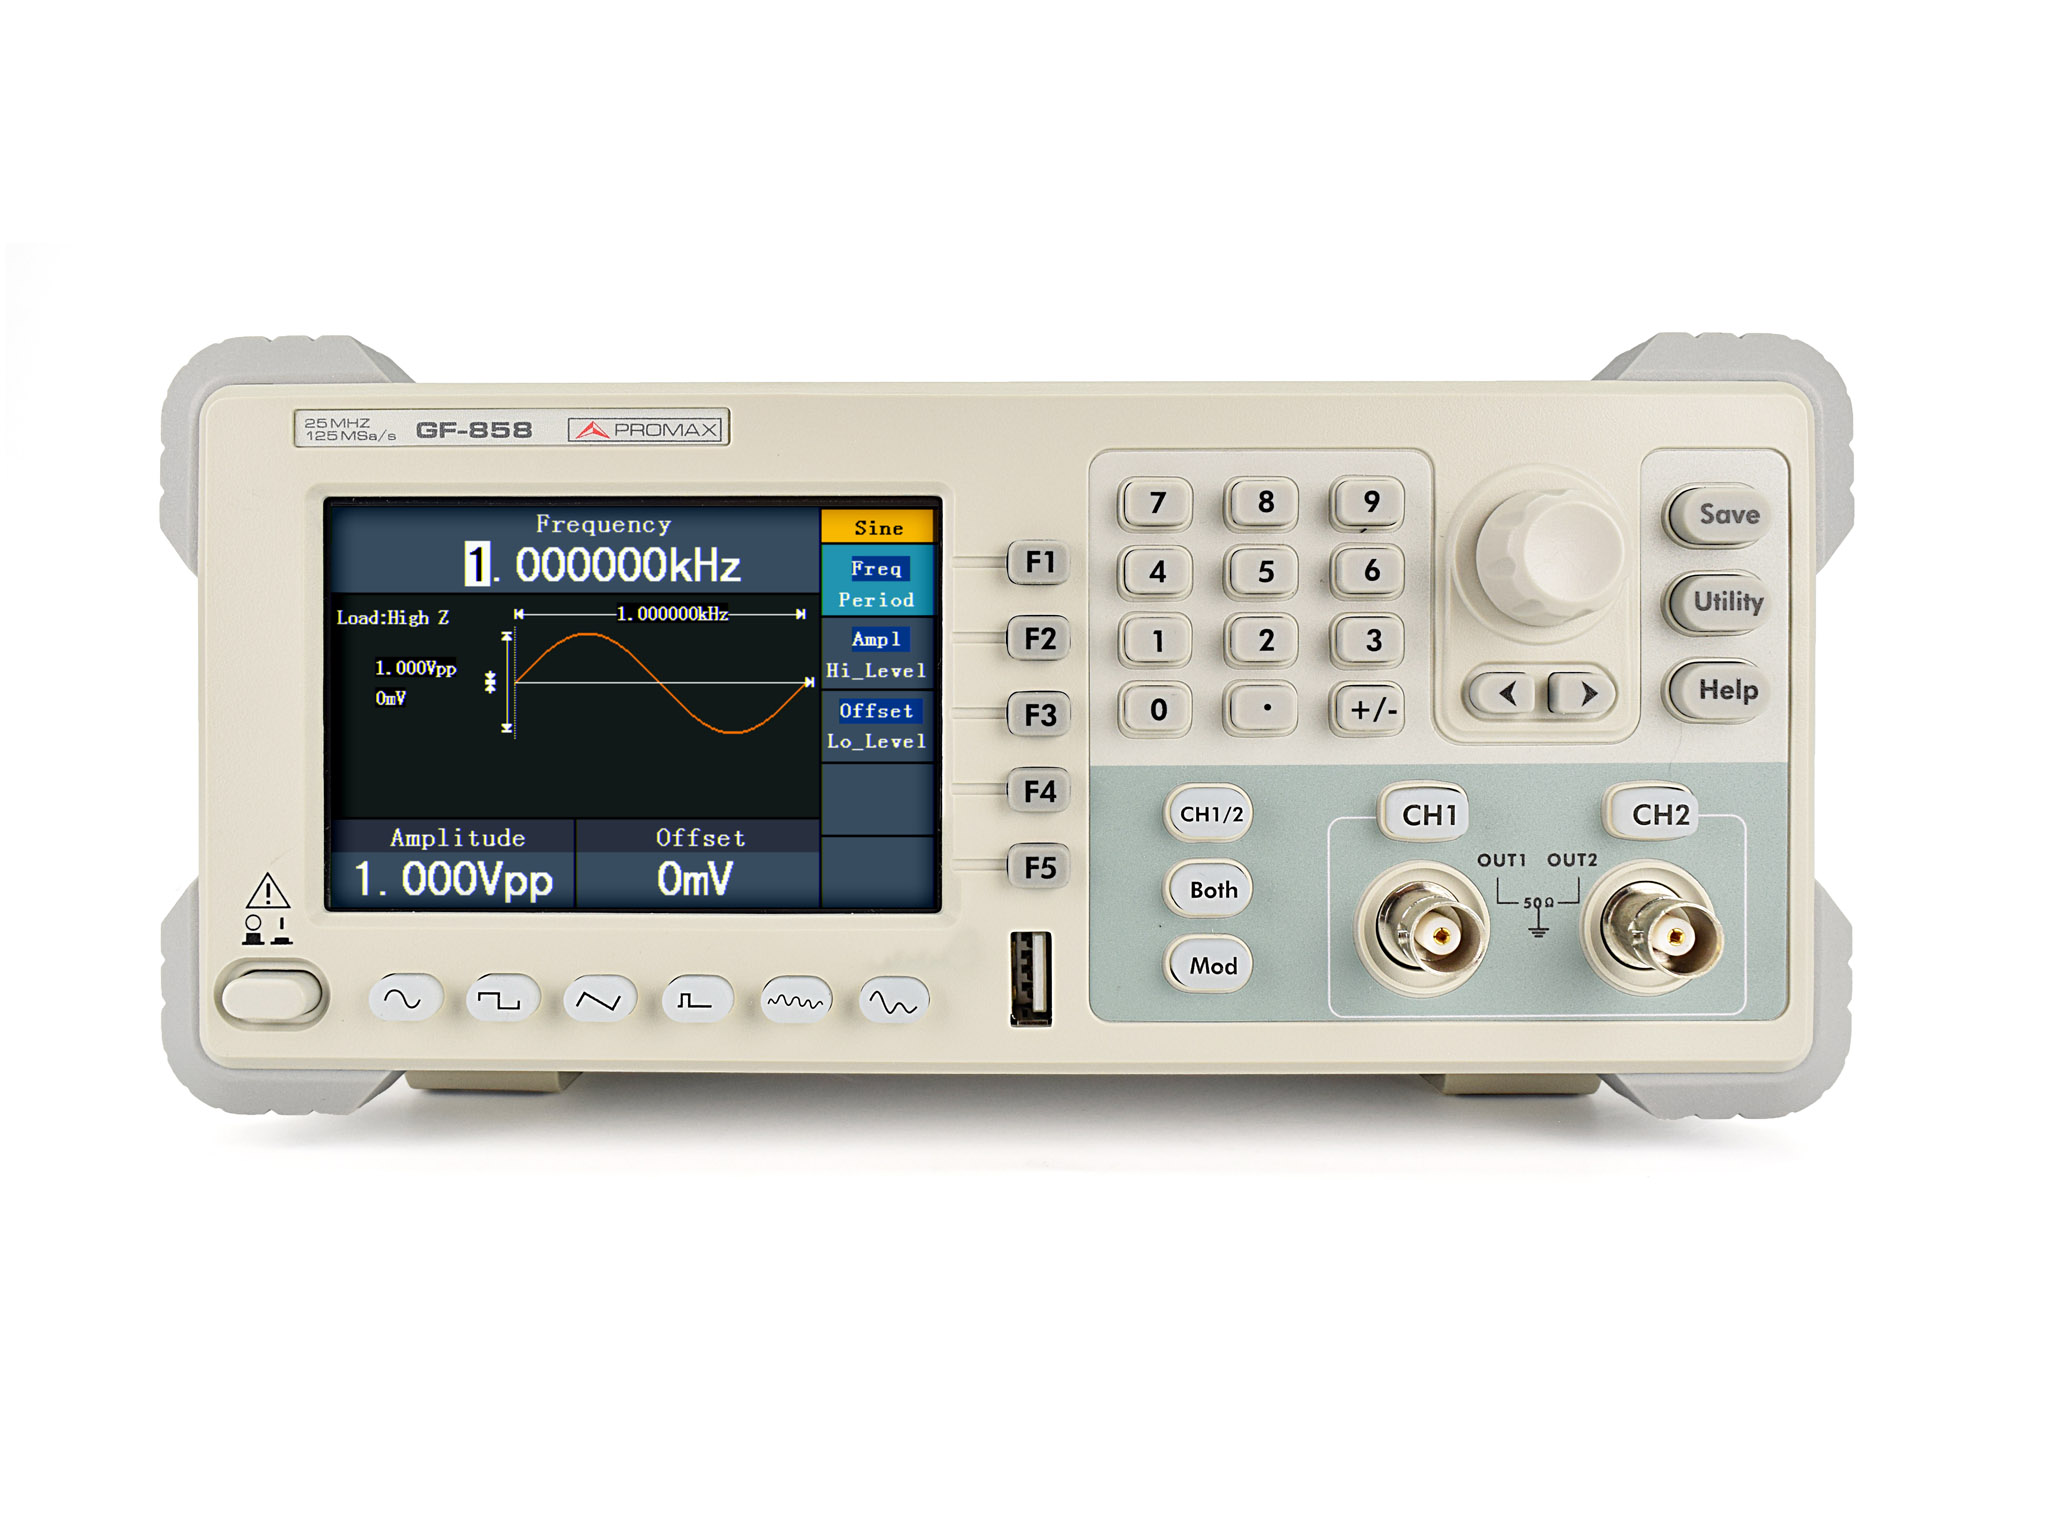 GF-858: 25 MHz Double arbitrary waveform generator with USB and RS-232